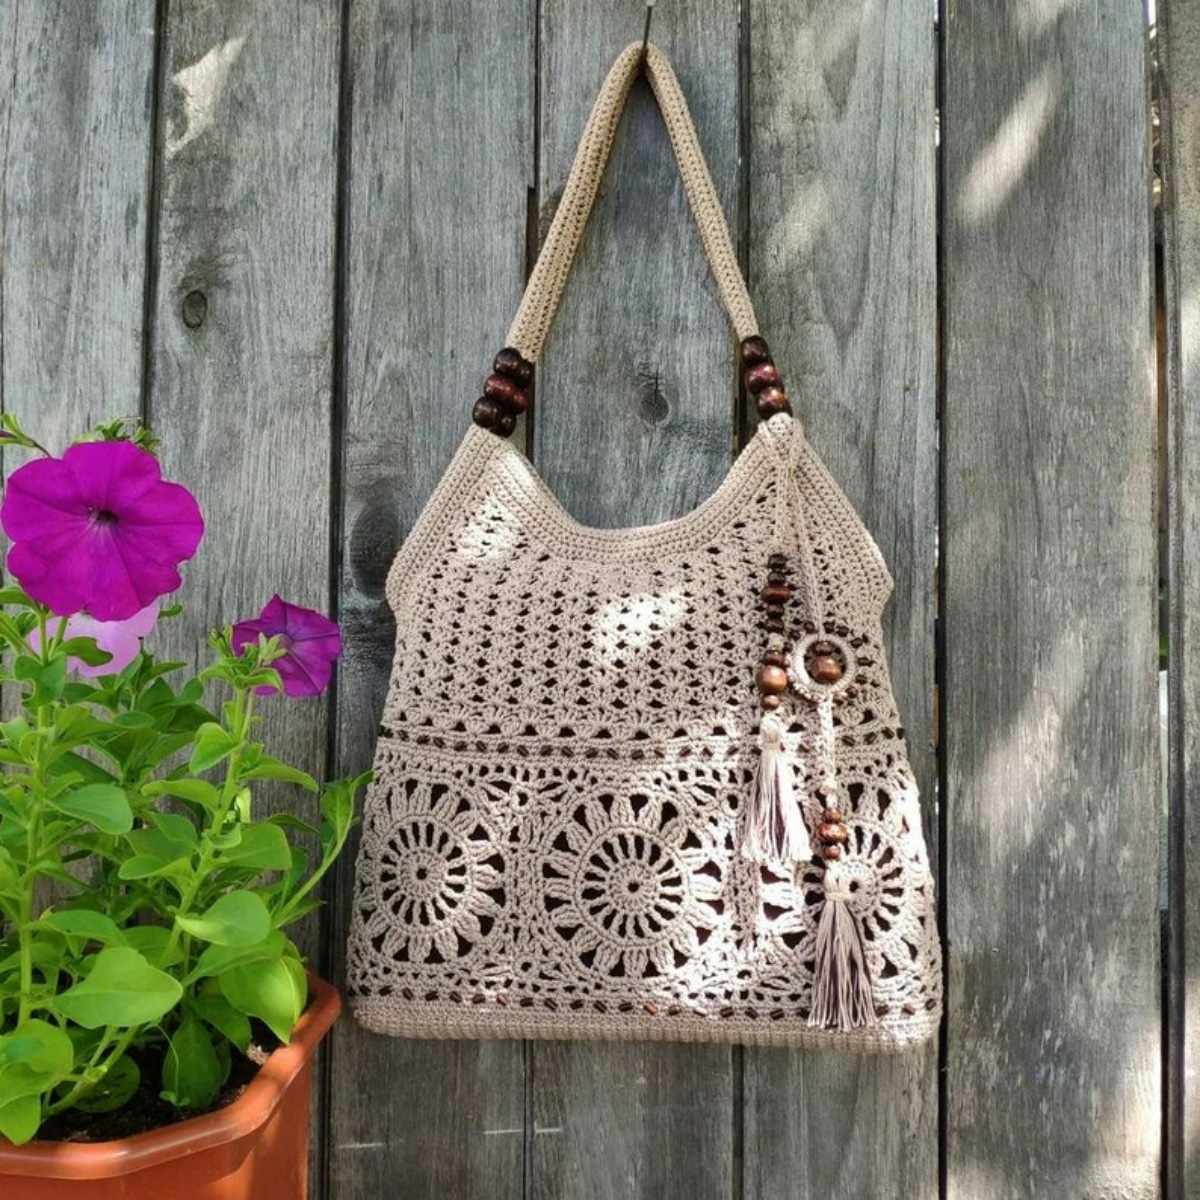 A beige crochet bag with a large flower print running along the bottom, some beads dangling from the right side, and a thick strap at the top.